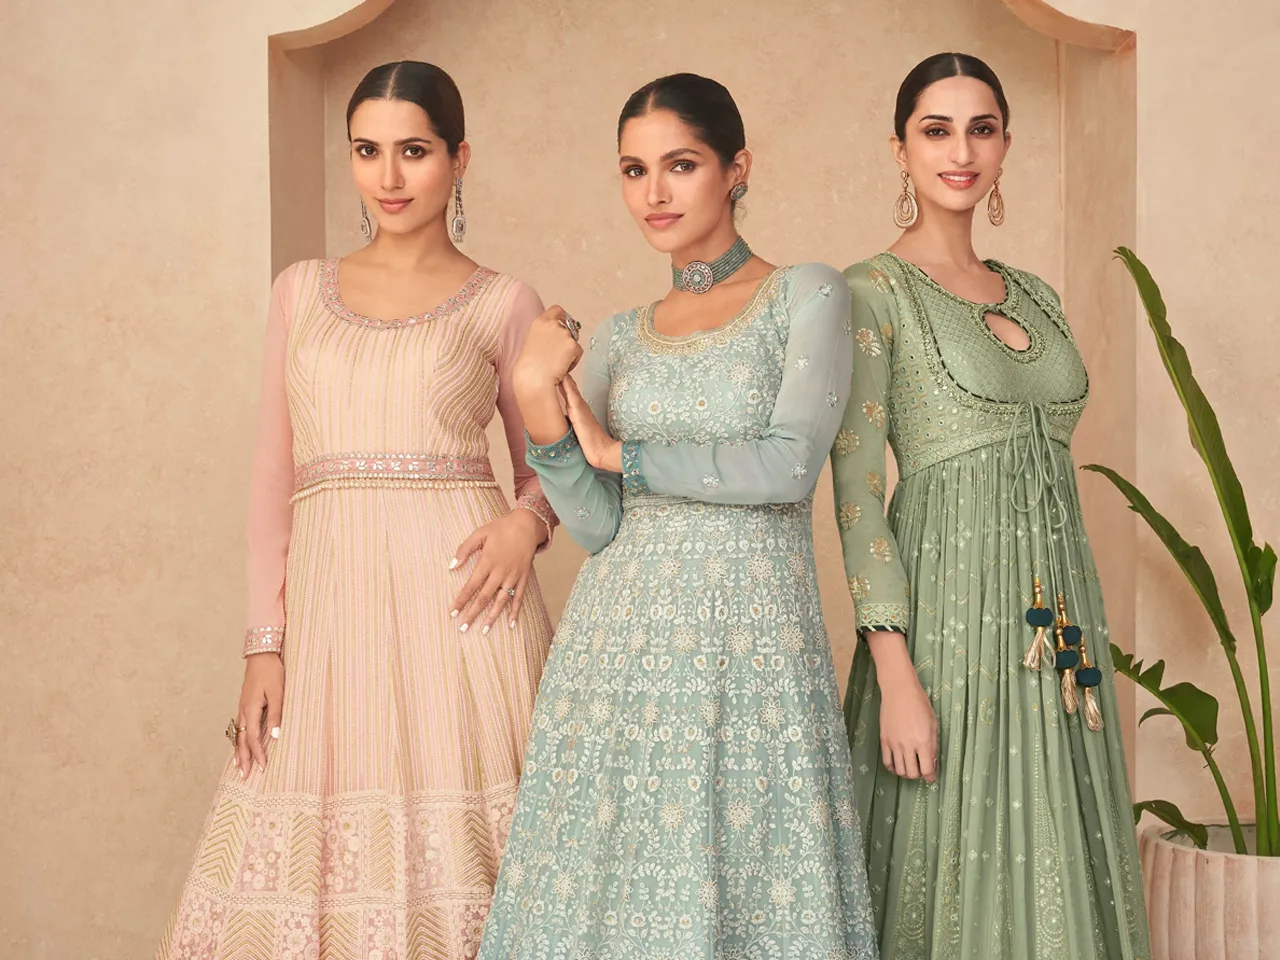 Take that twirl! Buy Anarkali Outfits from these homegrown brands!